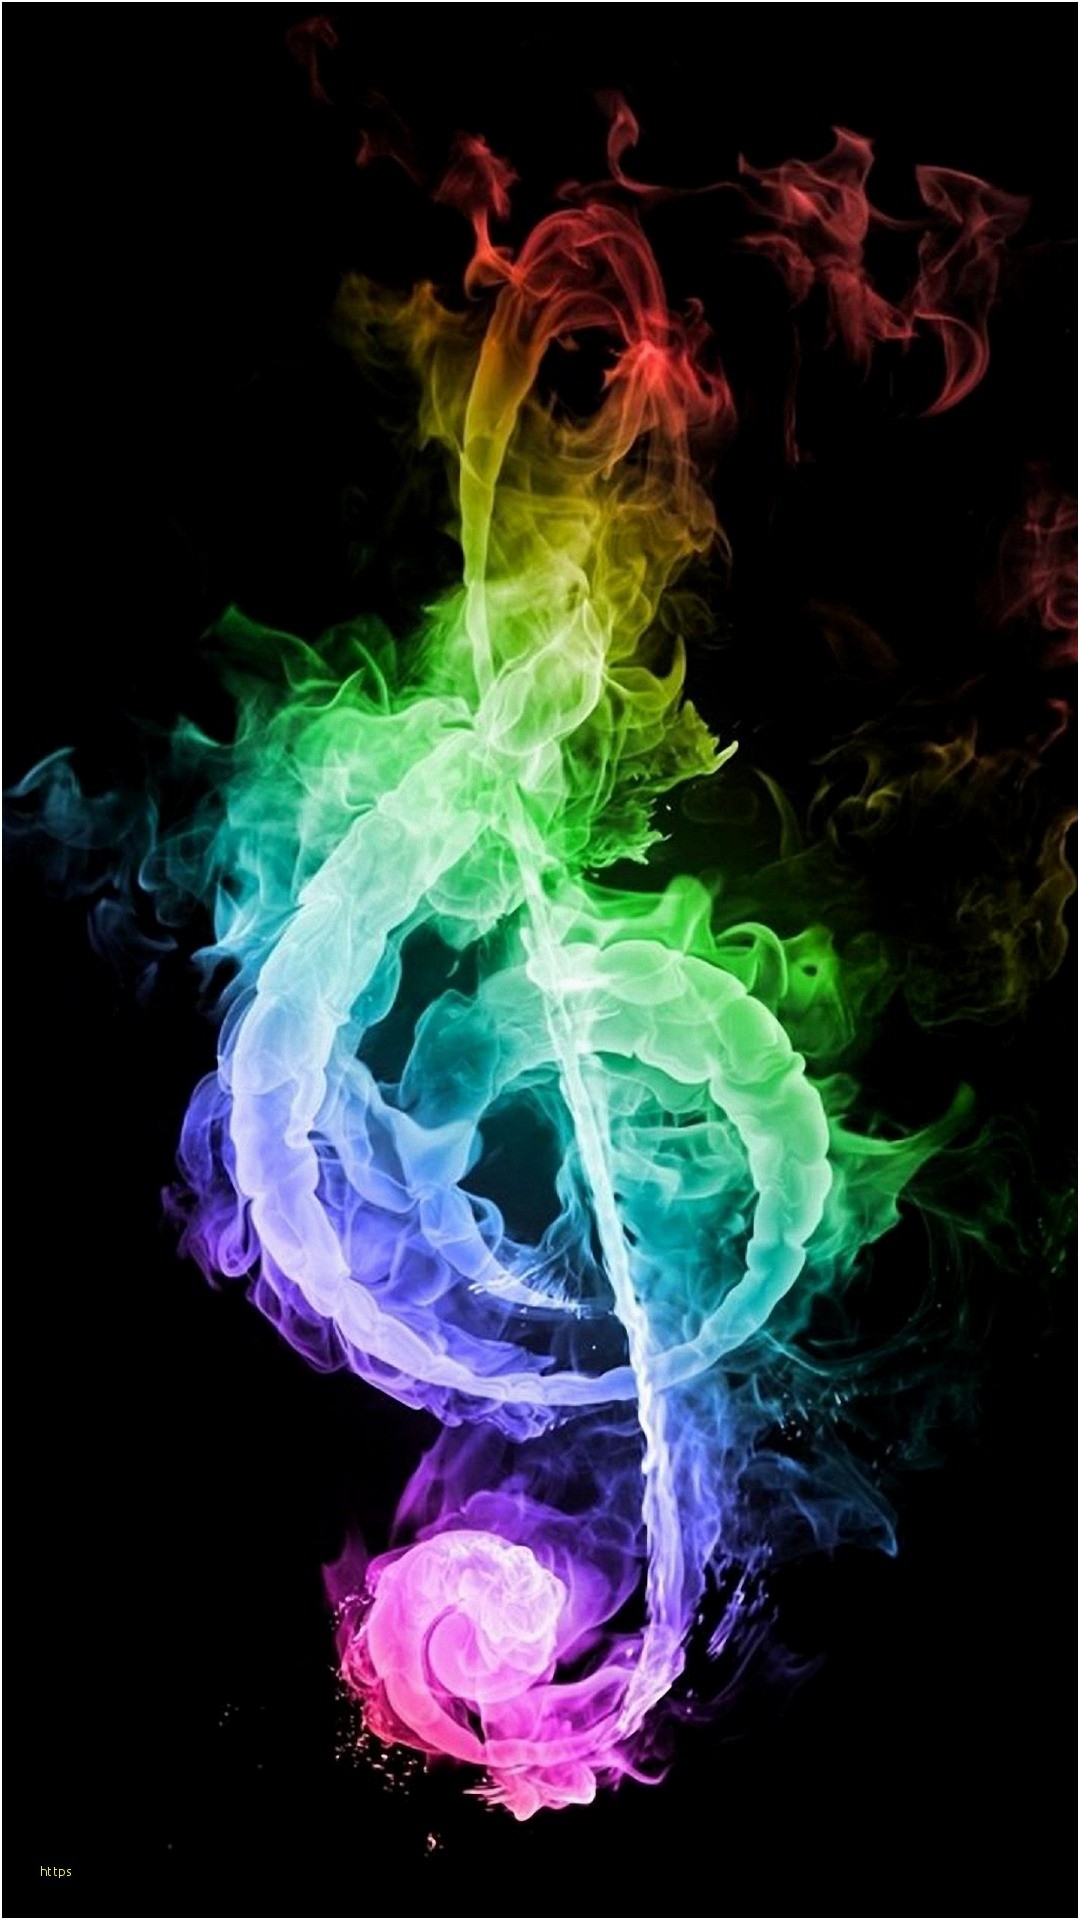 Music Note Wallpaper Lovely Colorful Music Note Iphone - Colorful Music Notes - HD Wallpaper 